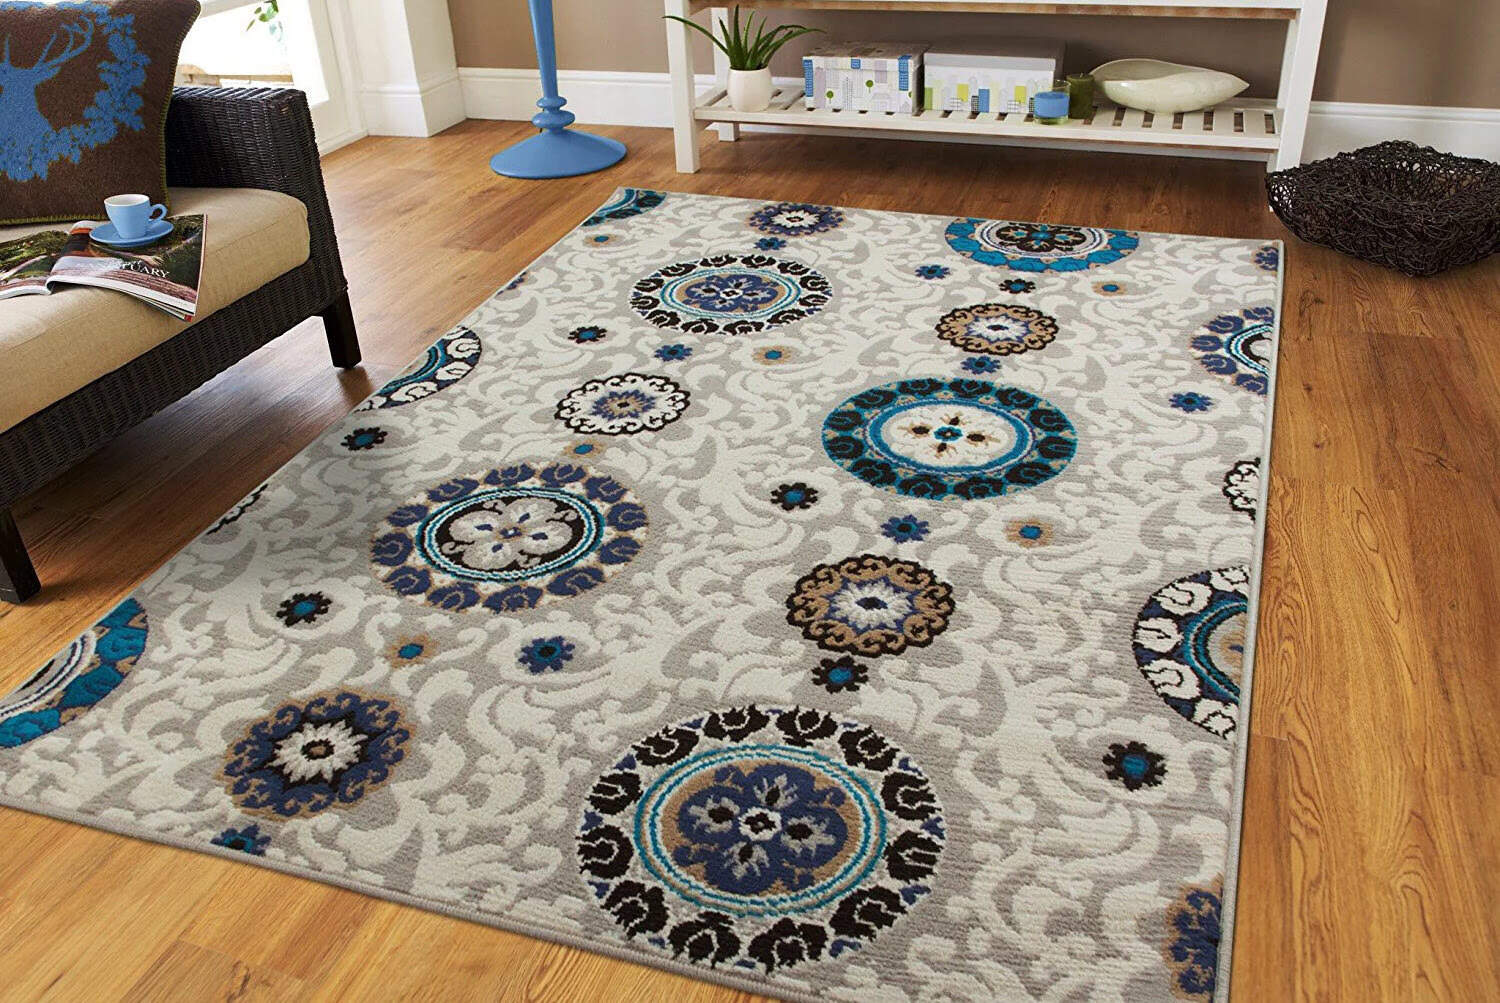 https://storables.com/wp-content/uploads/2023/10/14-incredible-area-rugs-5x7-clearance-under-50-for-2023-1697441279.jpg